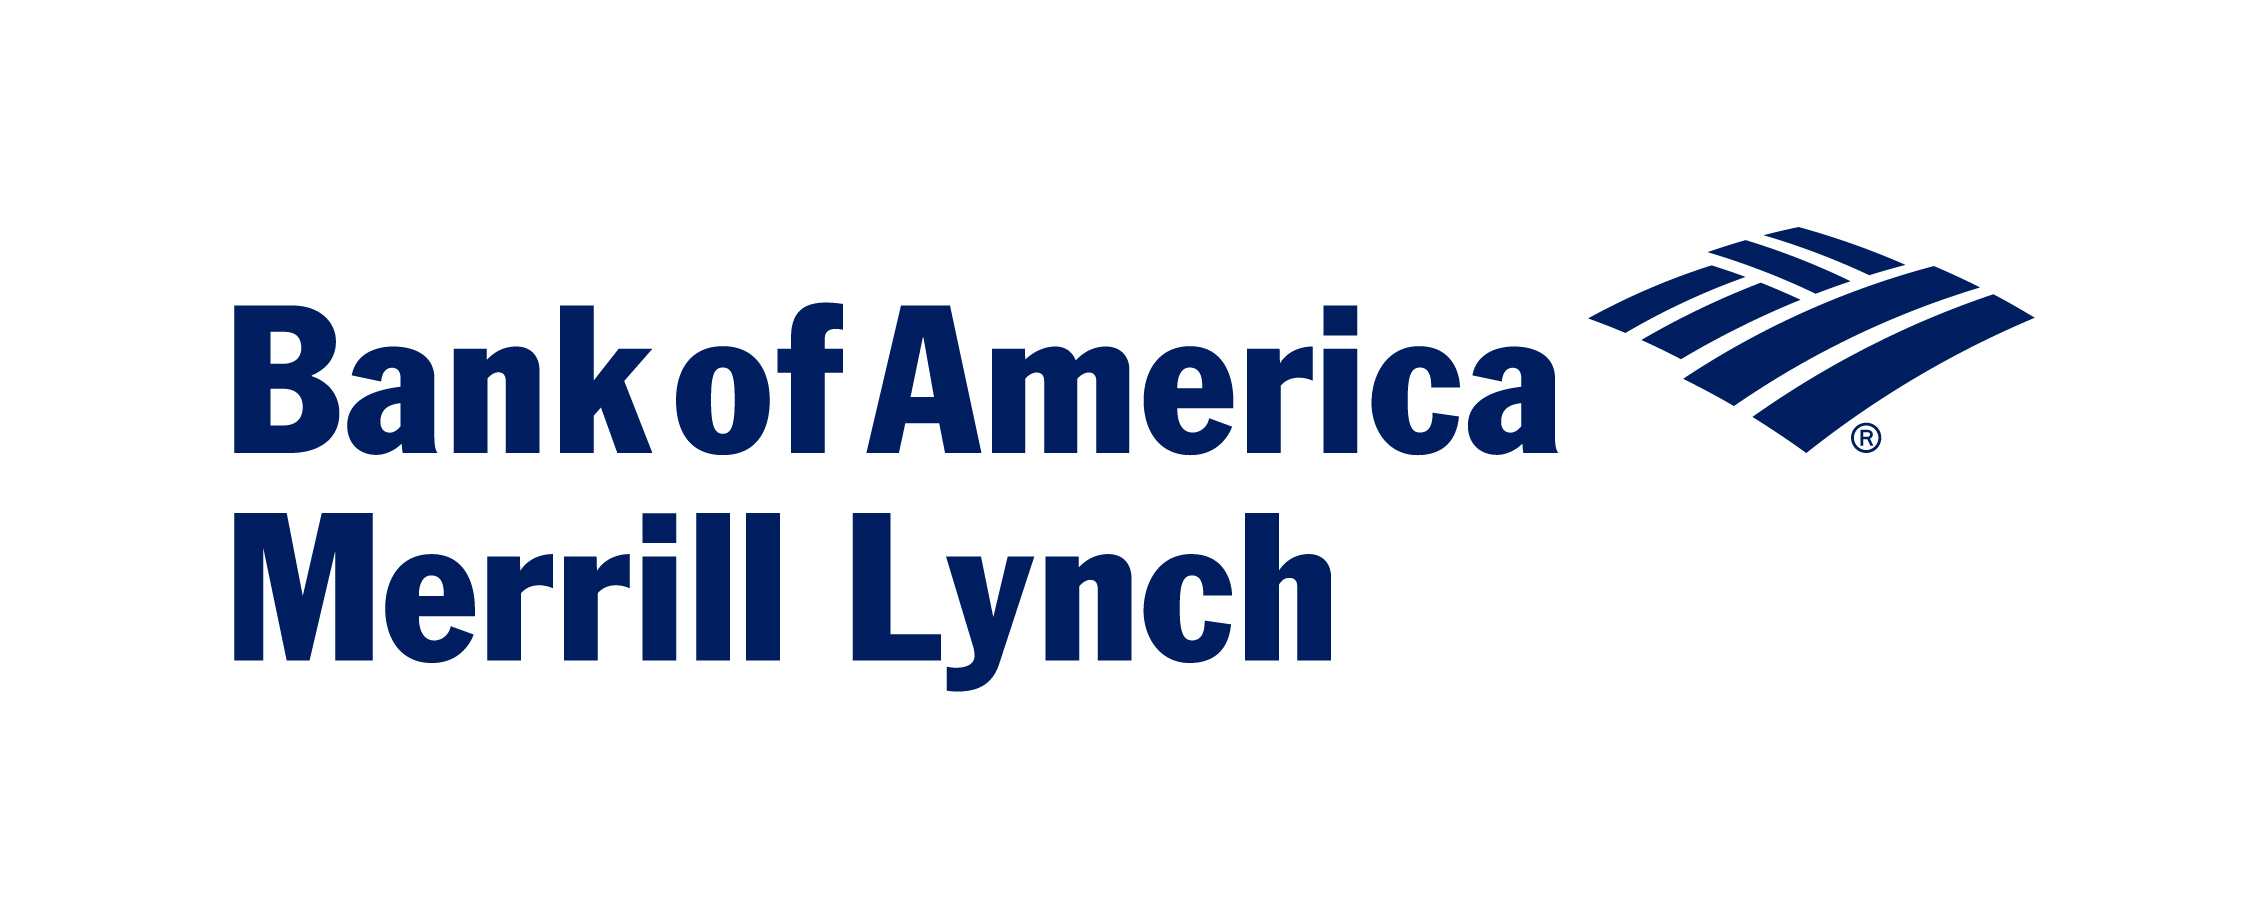 Bank of america online investing powered by merrill lynch planet money bet on bitcoin